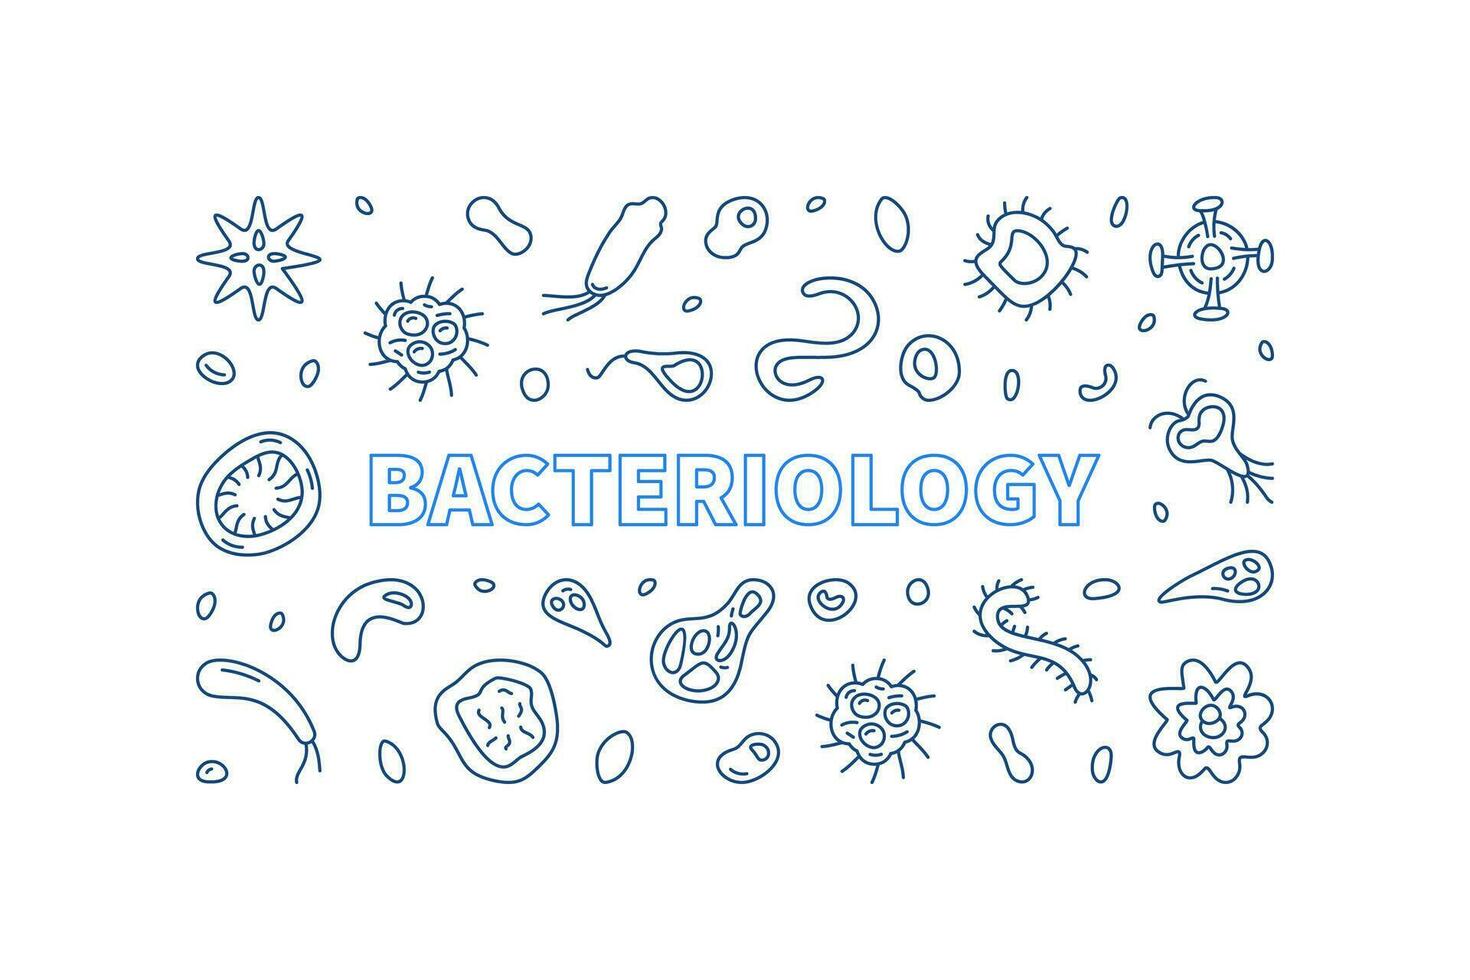 Bacteriology vector Science concept horizontal line banner or illustration